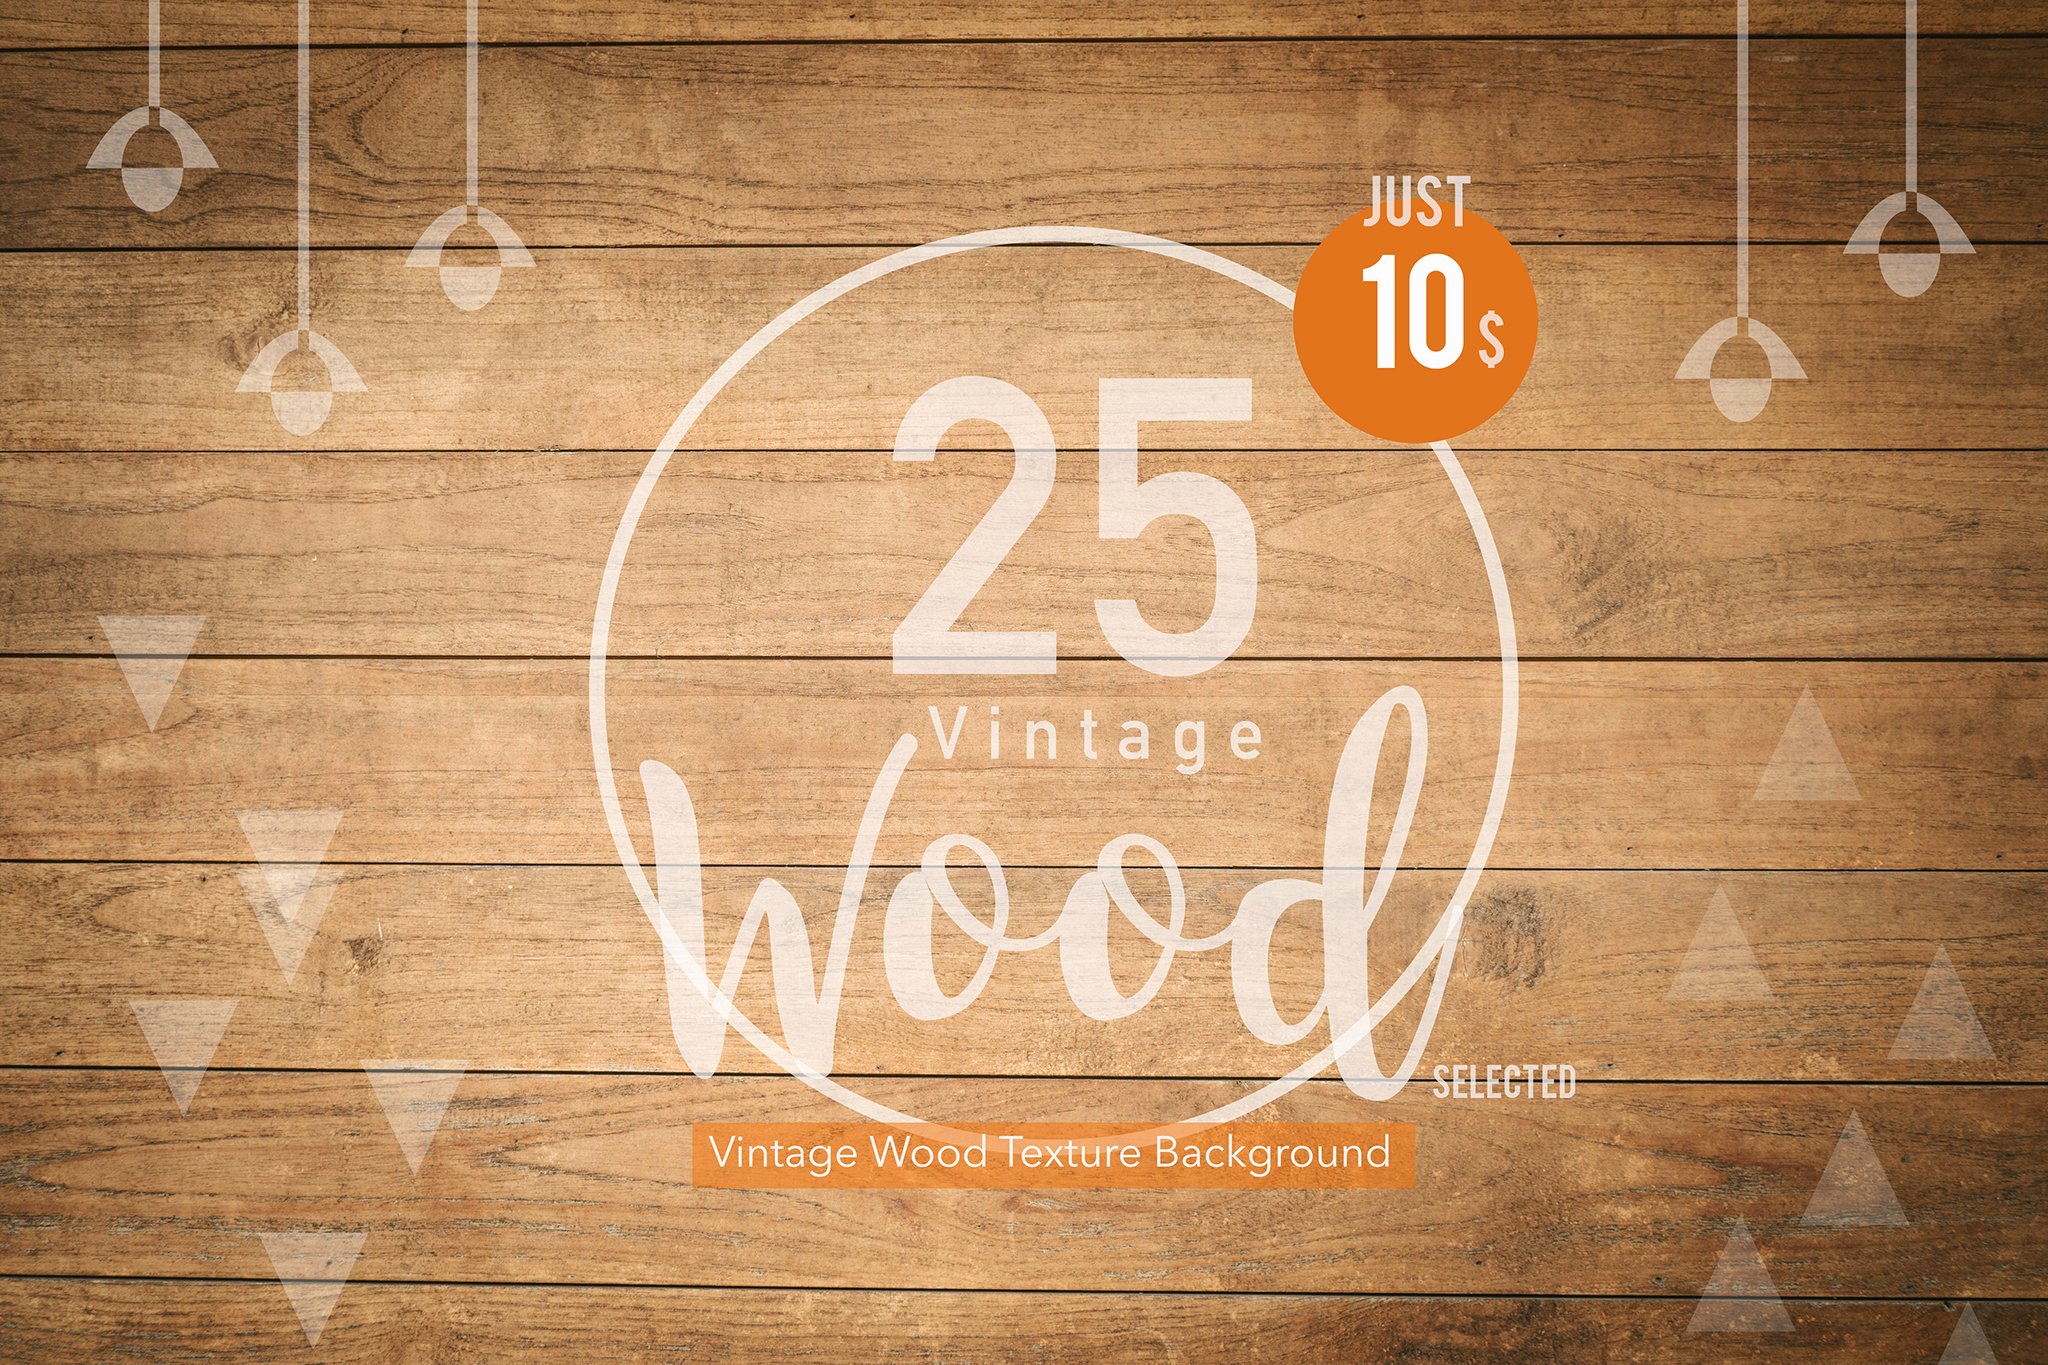 25 Vintage Wood Texture selected 01 cover image.